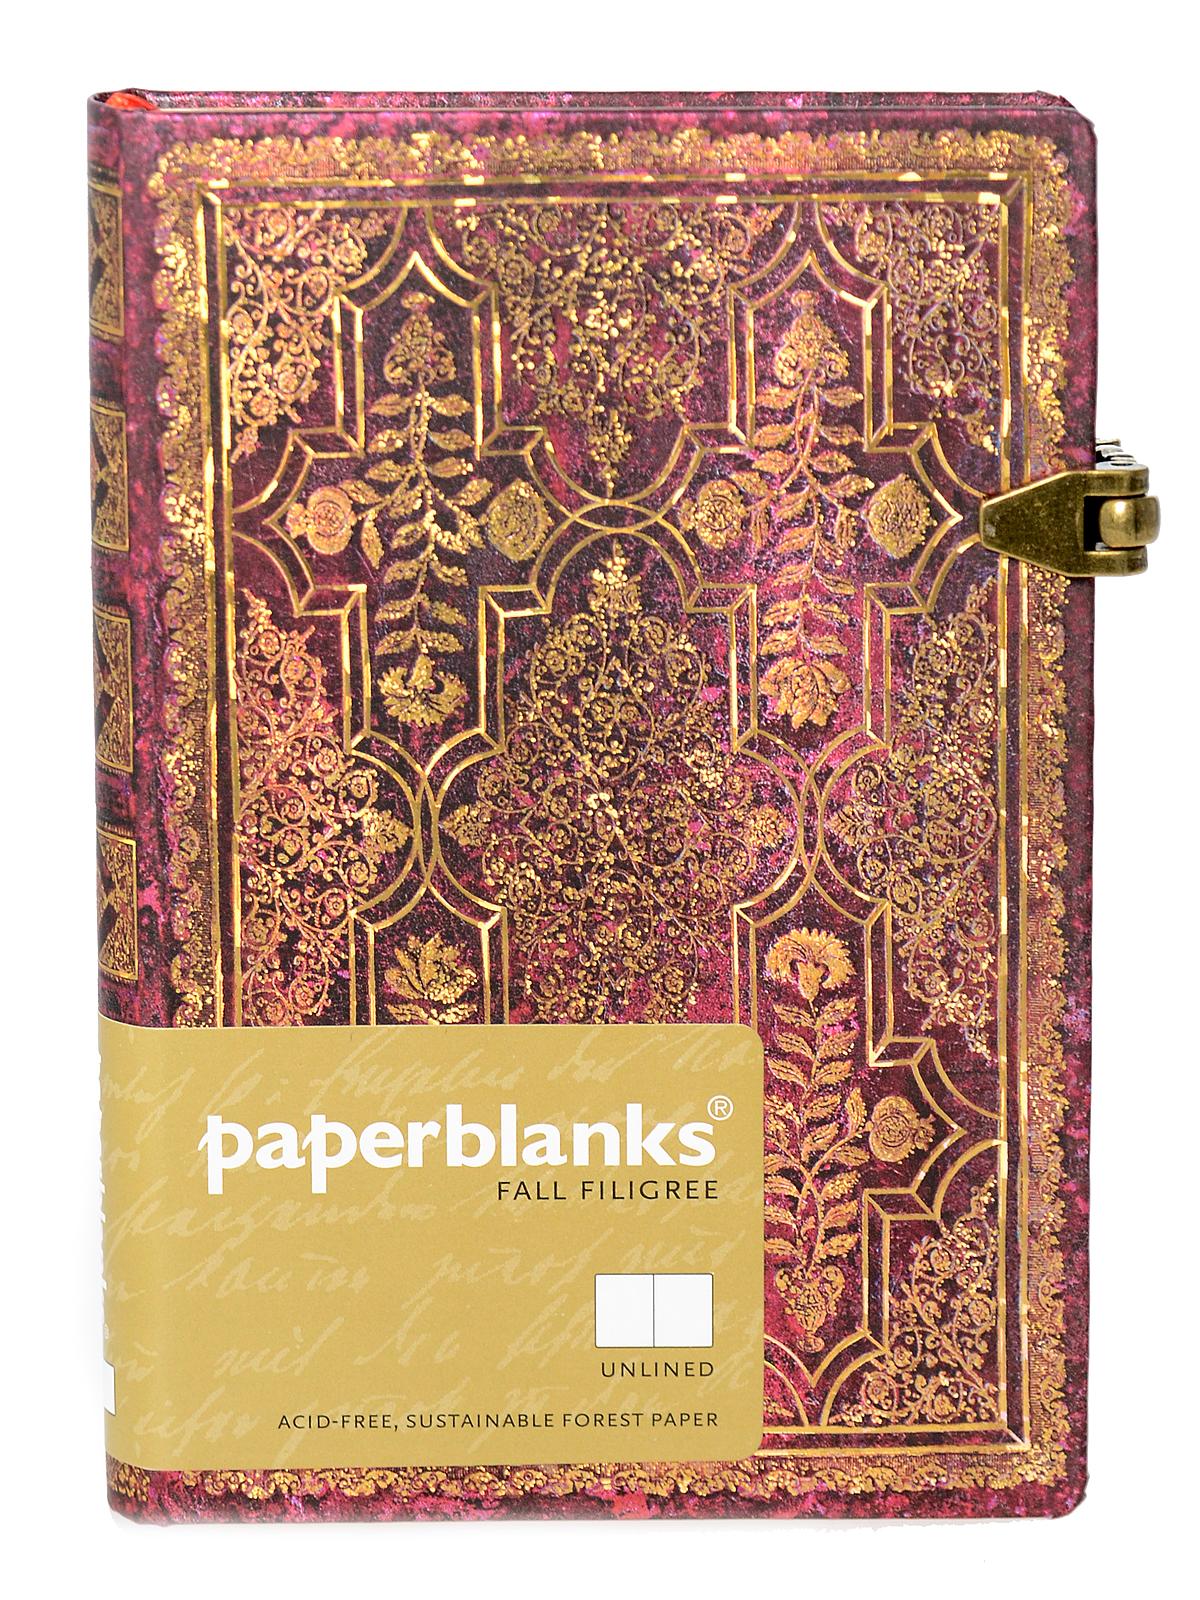 Fall Filigree Journals Amaranth Mini, 3 3 4 In. X 5 1 2 In. 208 Pages, Unlined